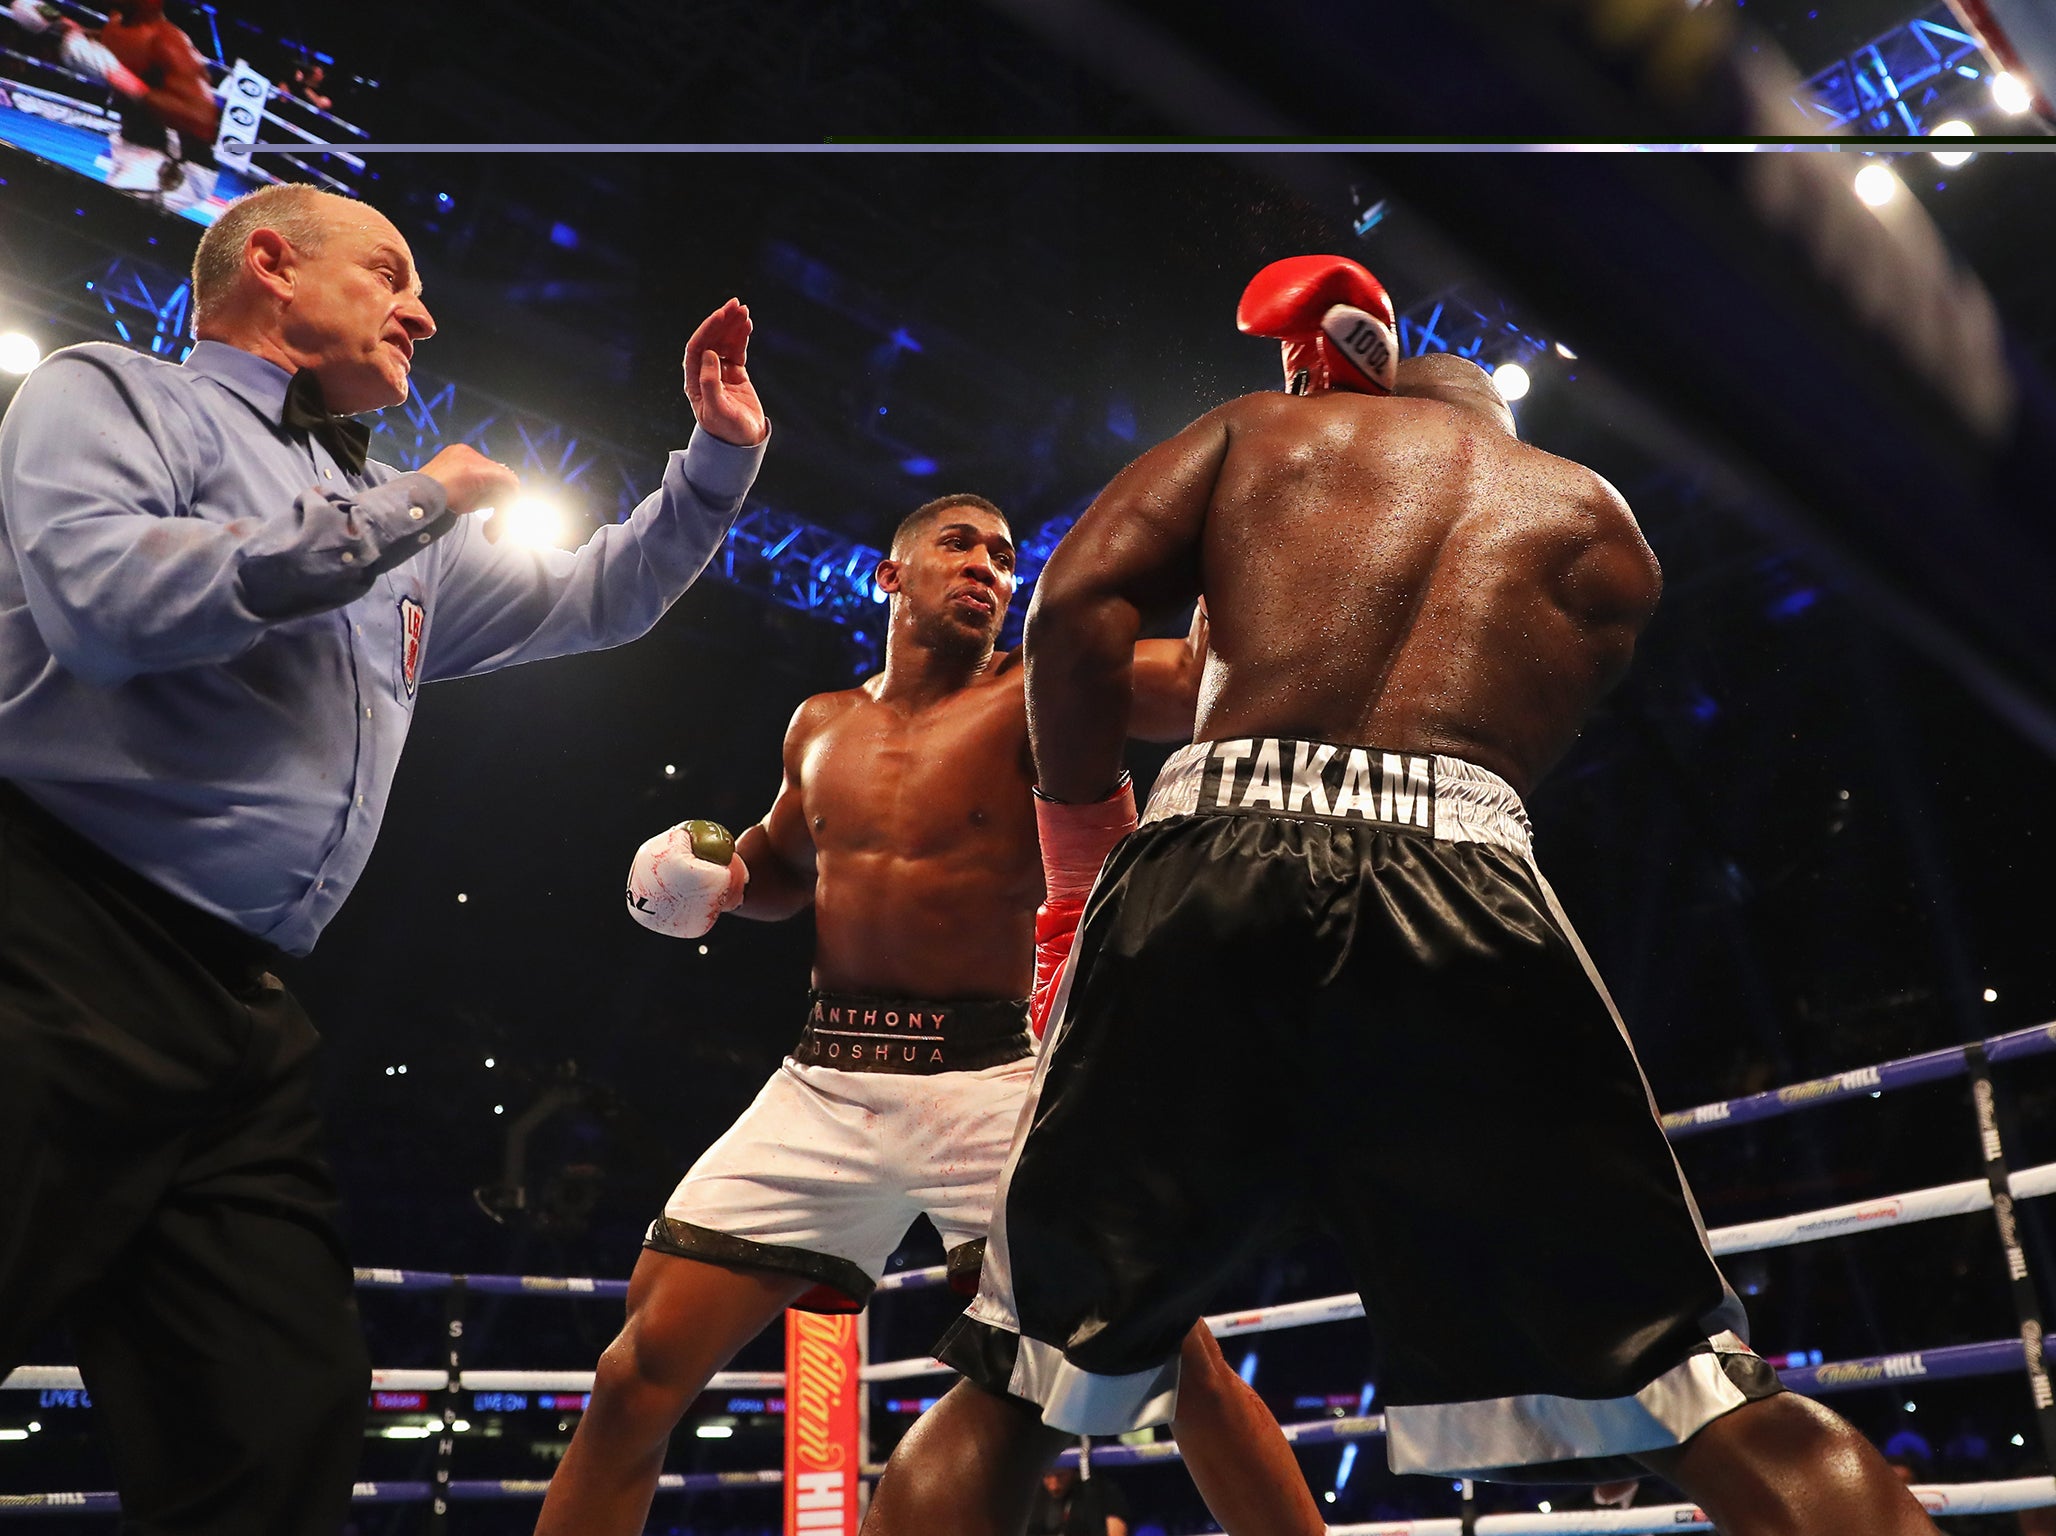 Joshua was made to work hard by the little known Takam